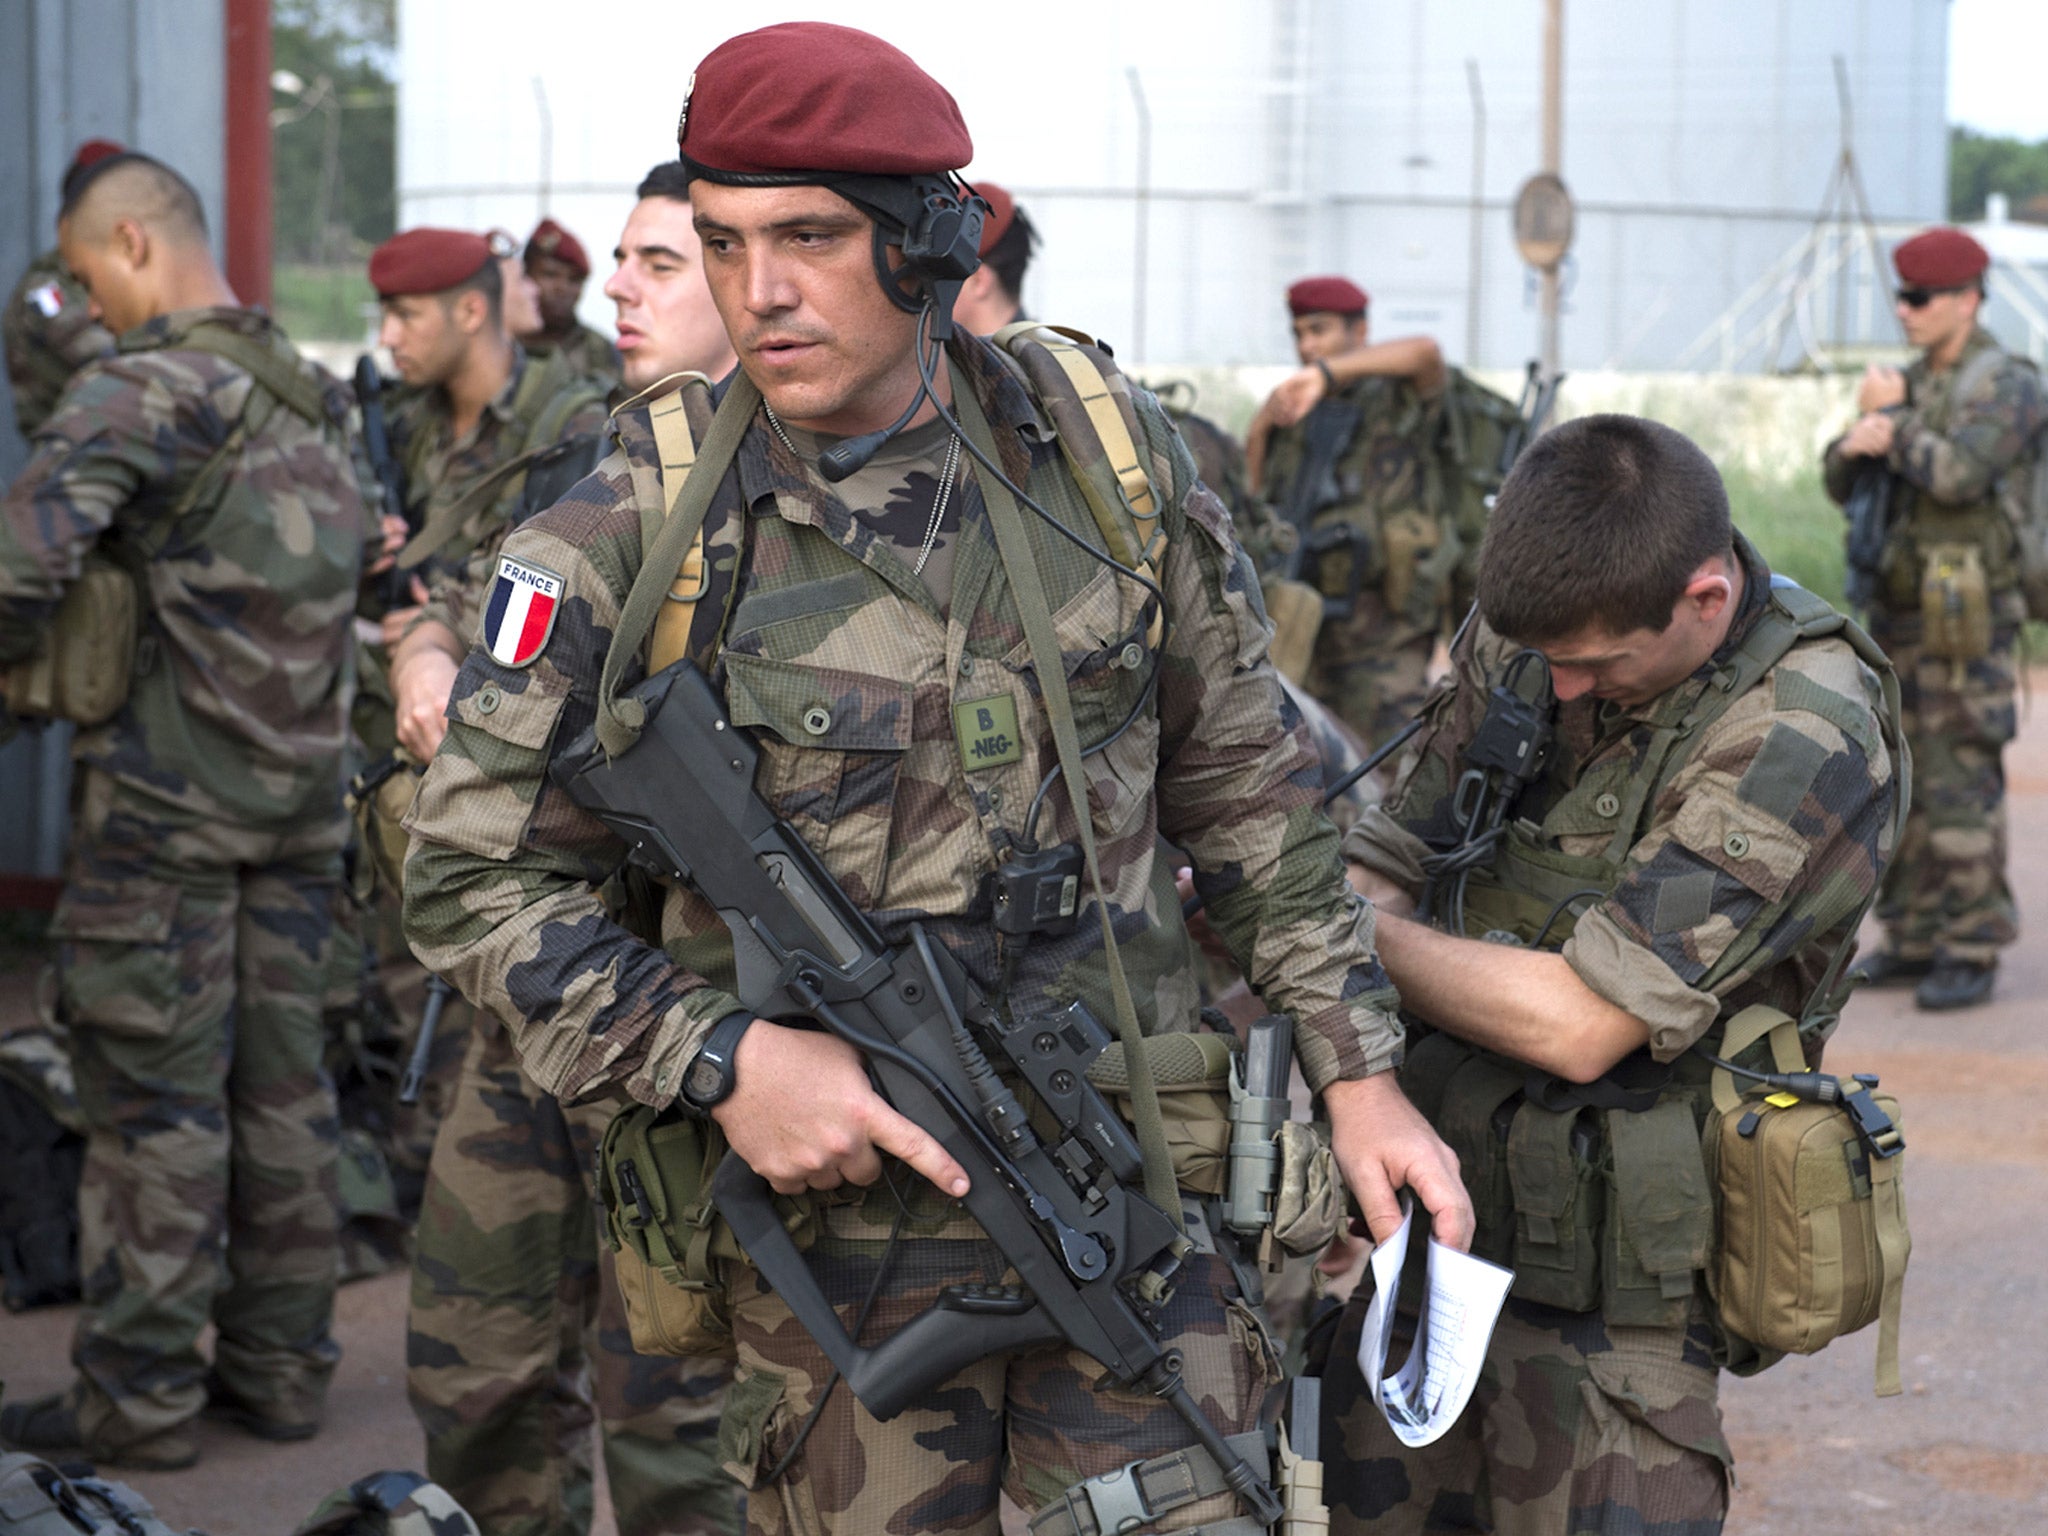 There are 400 French soldiers already on the ground in the Central African Republic